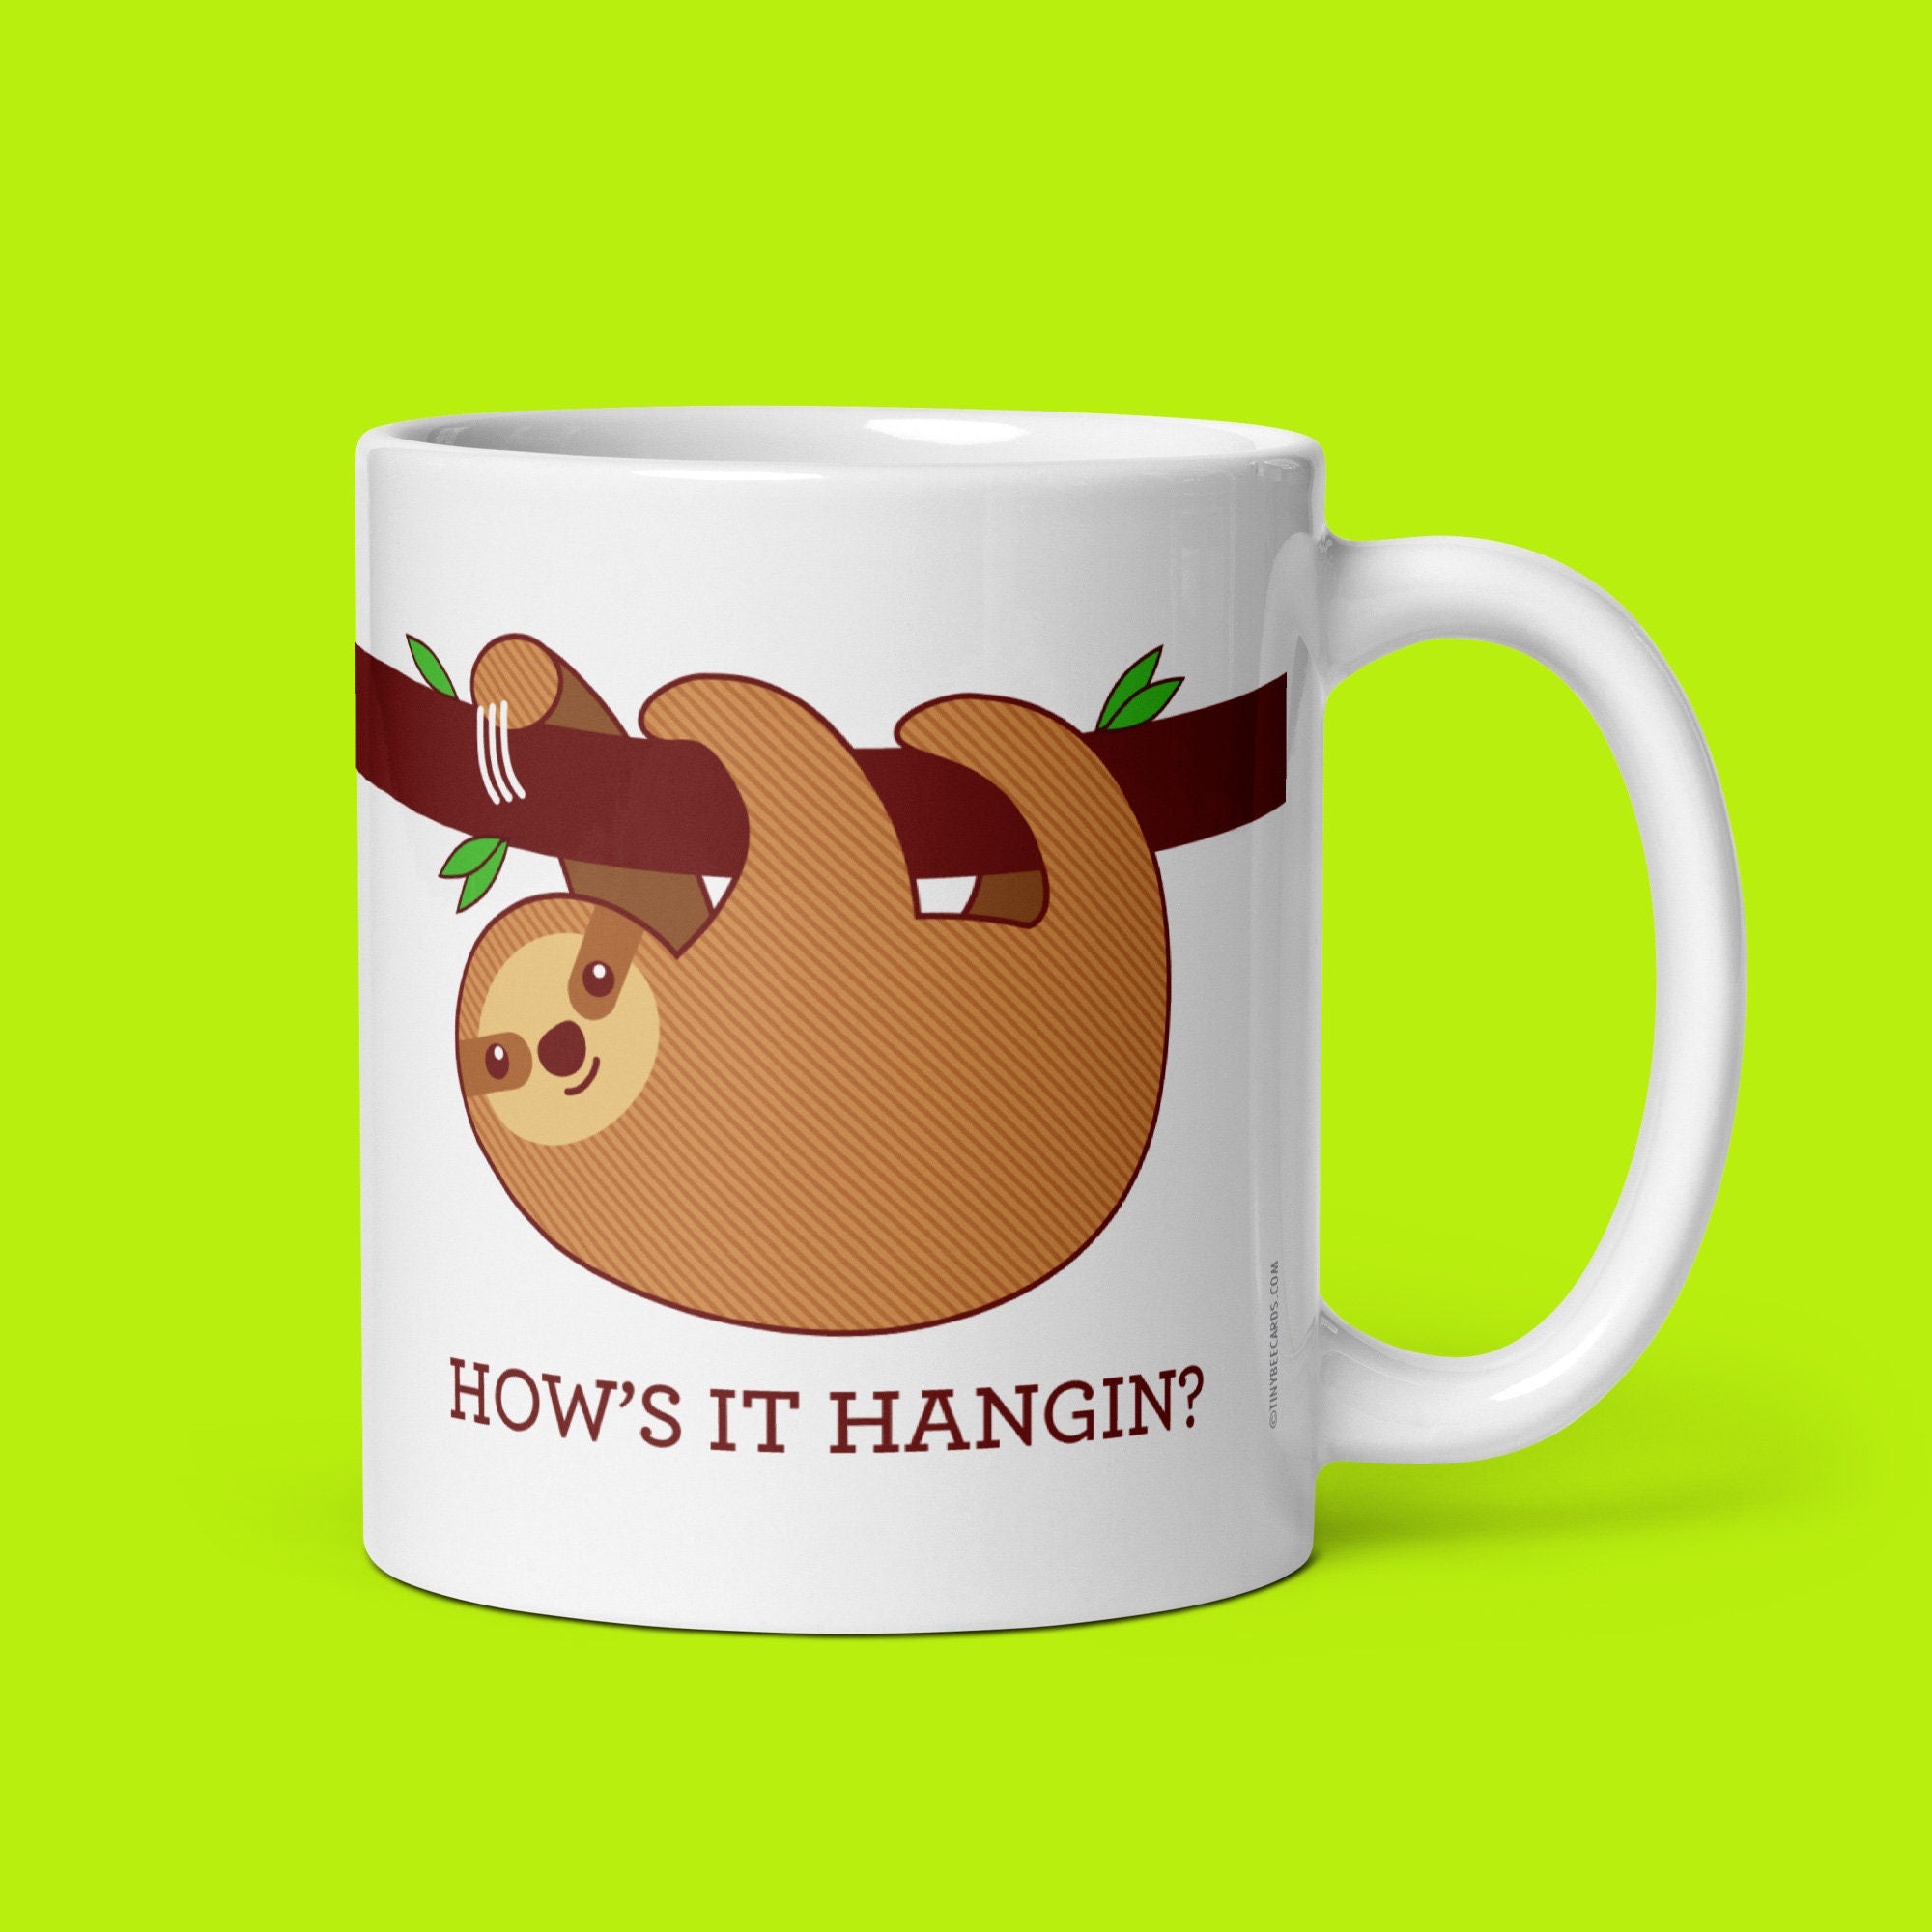 Funny Sloth Mug "How's It Hangin?" - funny coffee mug gift, funny puns, gift for friend, office gift, cute coffee mugs, sloth lover gifts